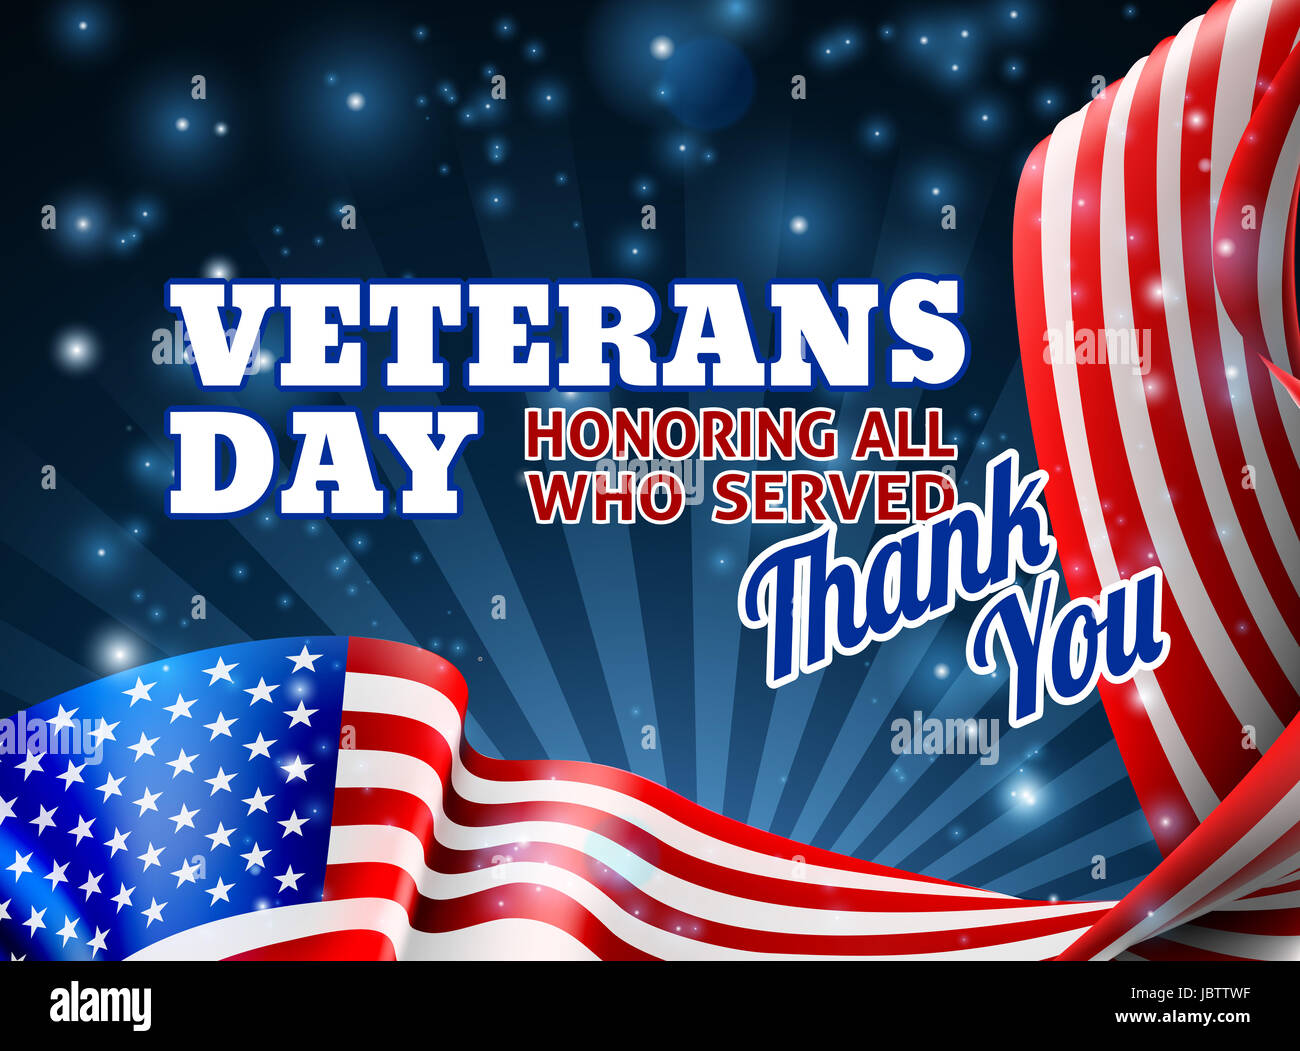 A Veterans Day background with an American Flag border design and Thank You message Stock Photo